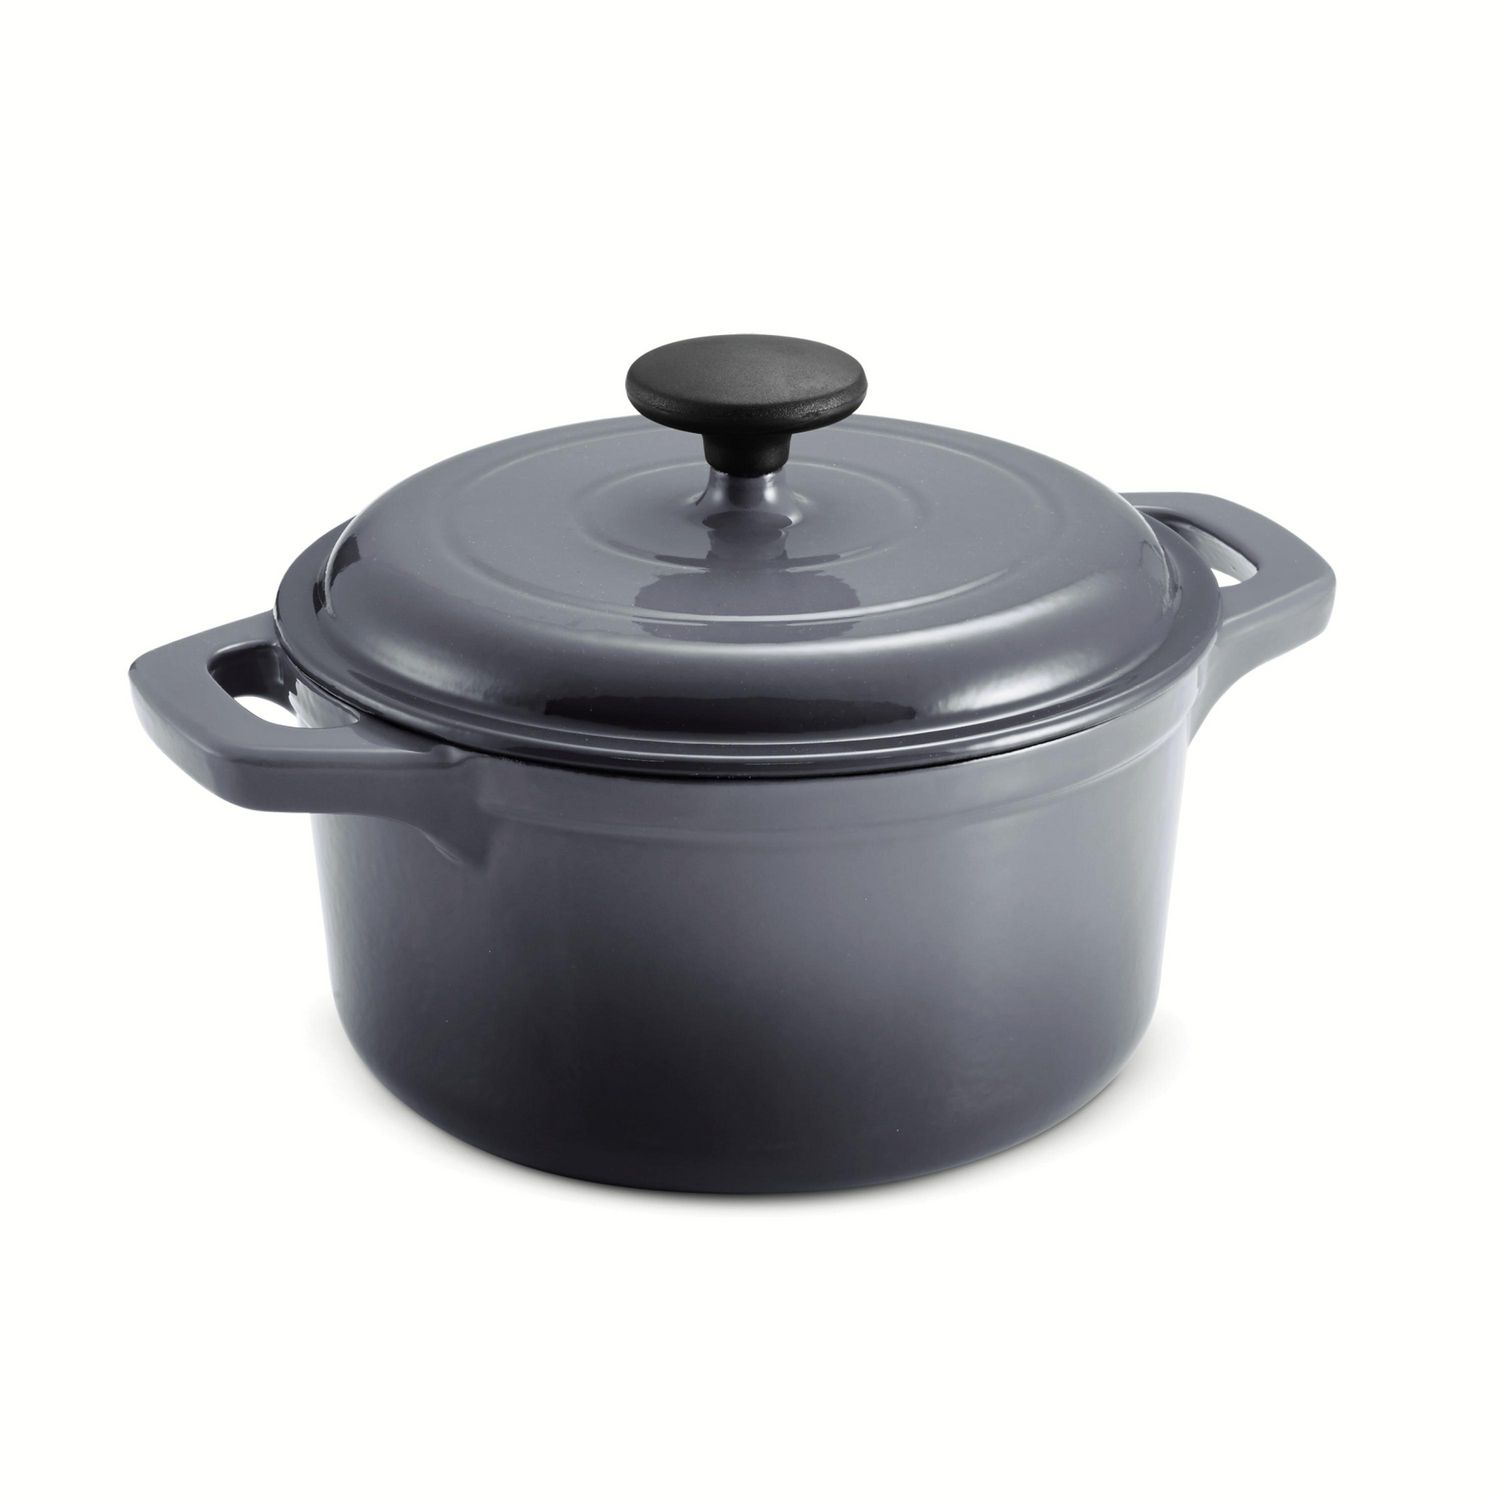 Tramontina 3.5 Qt Enameled Cast Iron Covered Dutch Oven Red